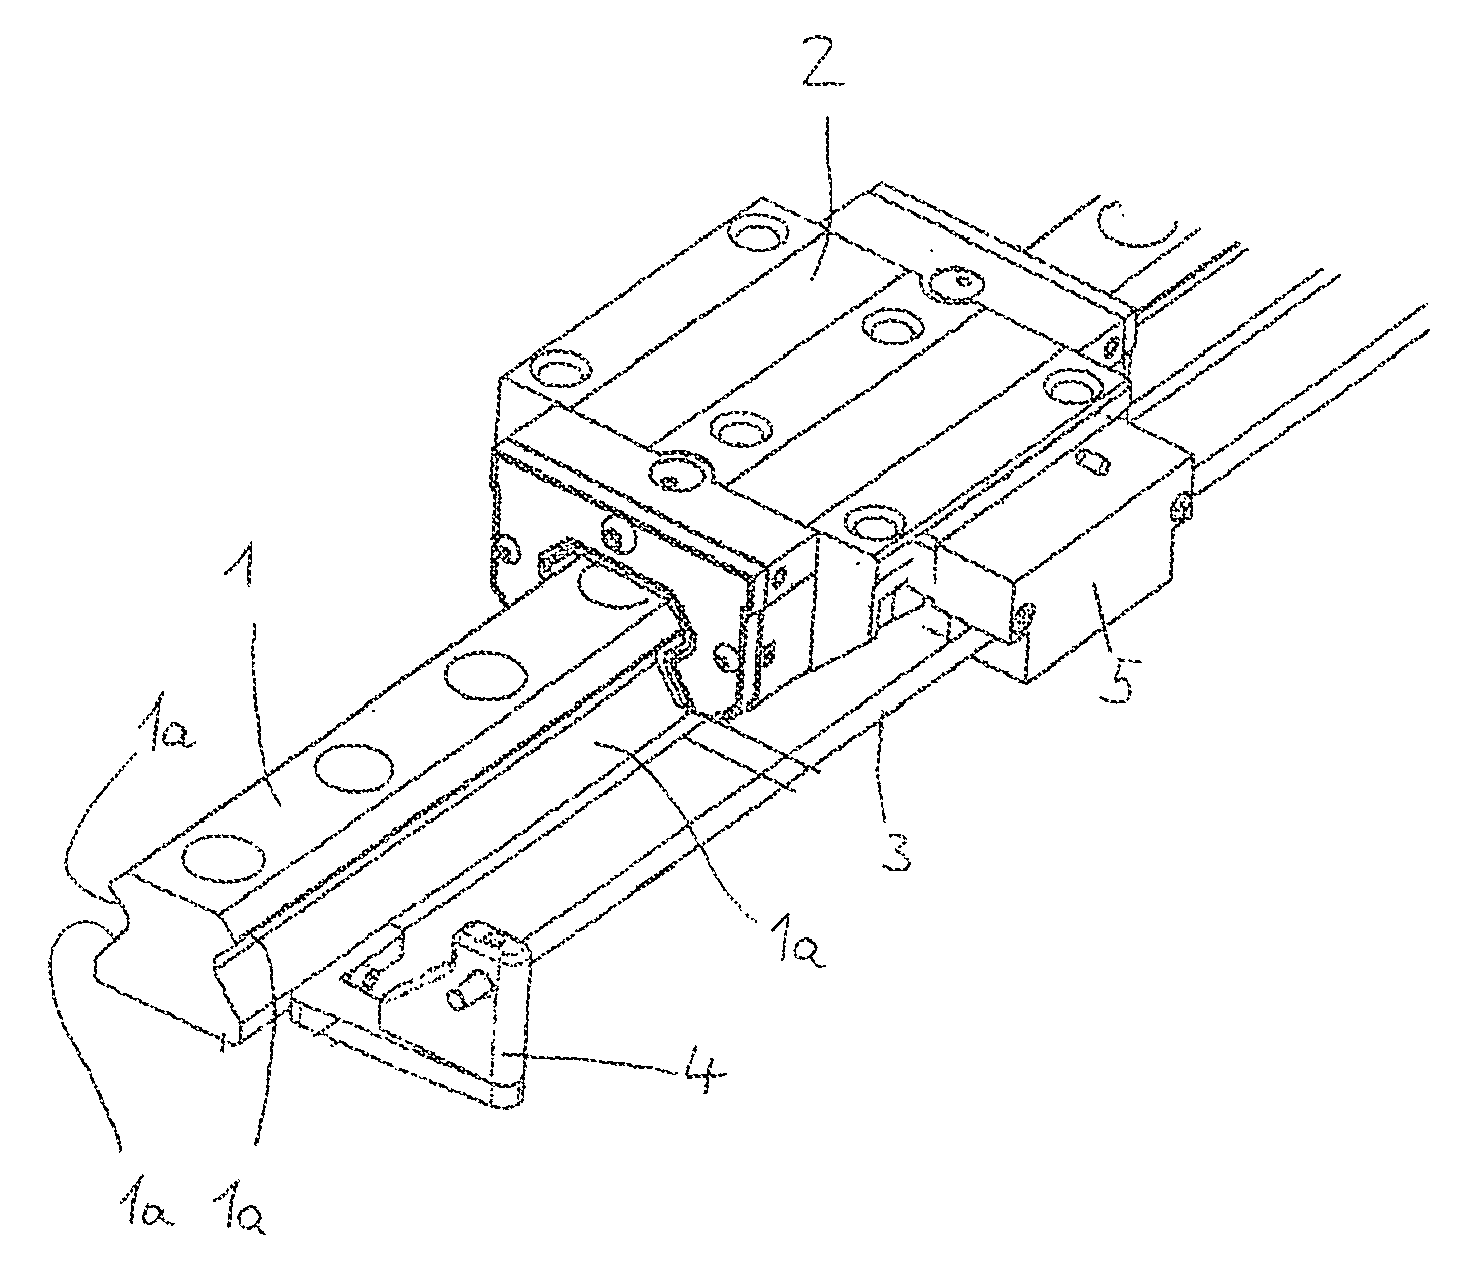 Guide rail of a linear guide